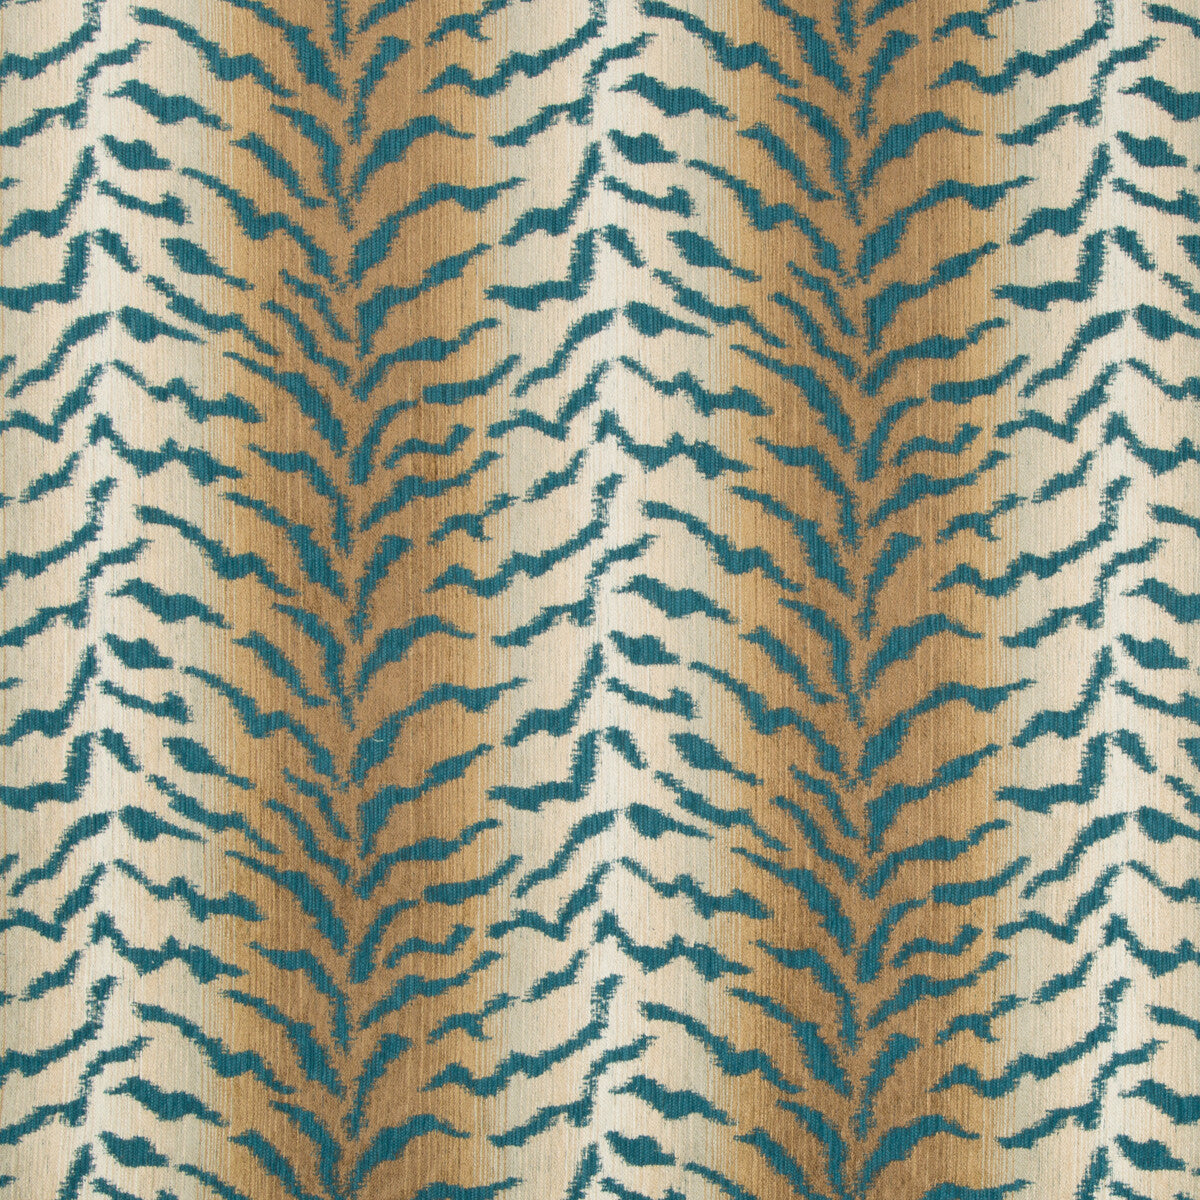 Kravet Design fabric in 35010-1615 color - pattern 35010.1615.0 - by Kravet Design in the Performance Crypton Home collection